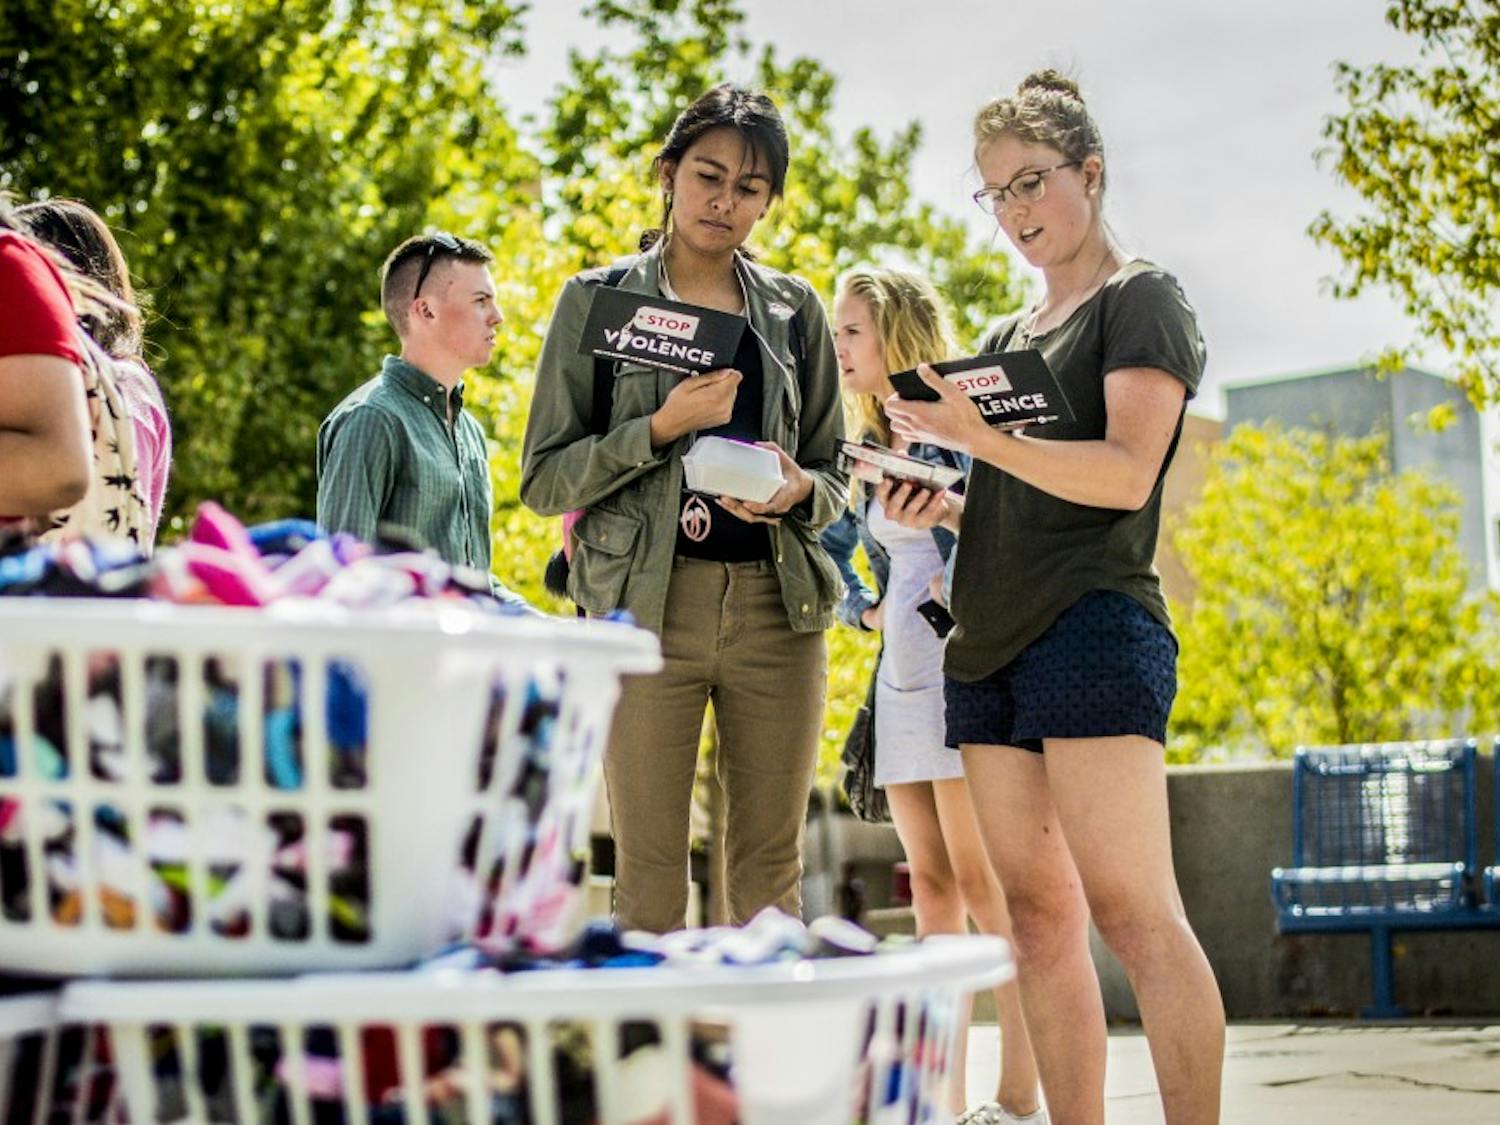 Kassidy Steckbeck, right,&nbsp;member of Students for Life UNM, shares information with Alma Lozano near the UNM Duck Pond, Friday, Sept. 22, 2017.  Students for Life UNM held the tabling event, "Stop the Violence," Friday to provide information and resources addressing abortion as an act of violence, using the hampers in the foreground filled with 6,276 infant socks to represent&nbsp;the amount of abortions performed at Planned Parenthood during a normal work week.